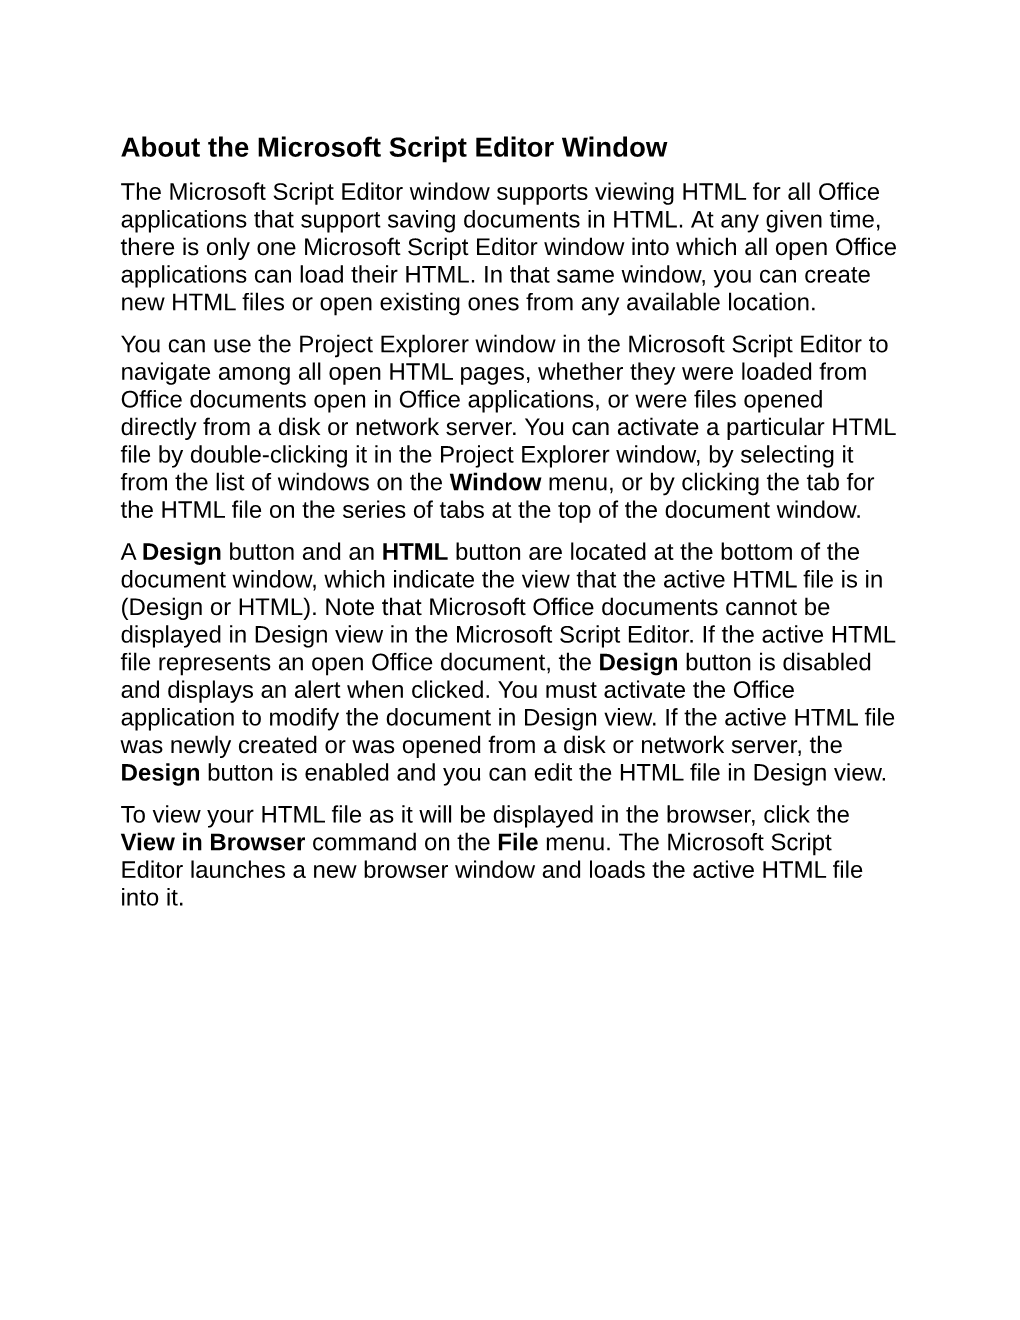 Microsoft Script Editor Help Welcome to the Microsoft Script Editor